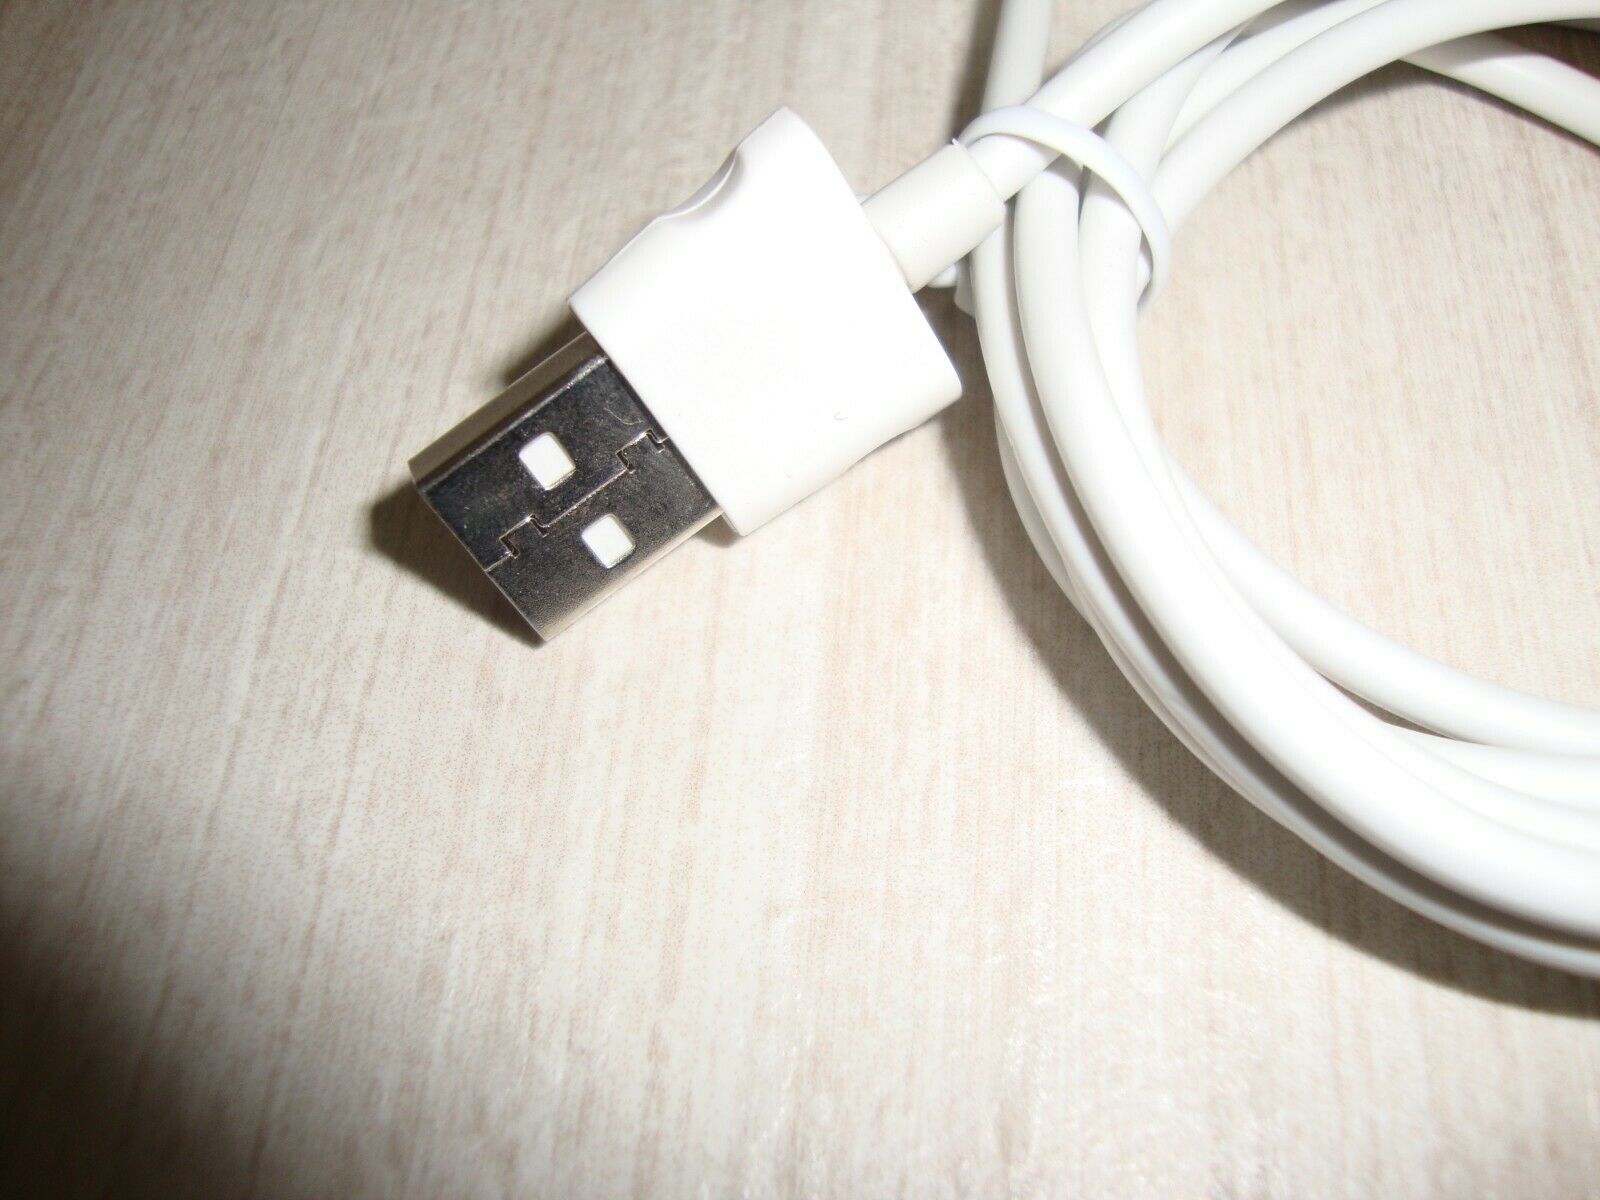 3 Ft USB Data Sync Charger Cable Cord For Phone 3G 3GS 4 4S iPad 2